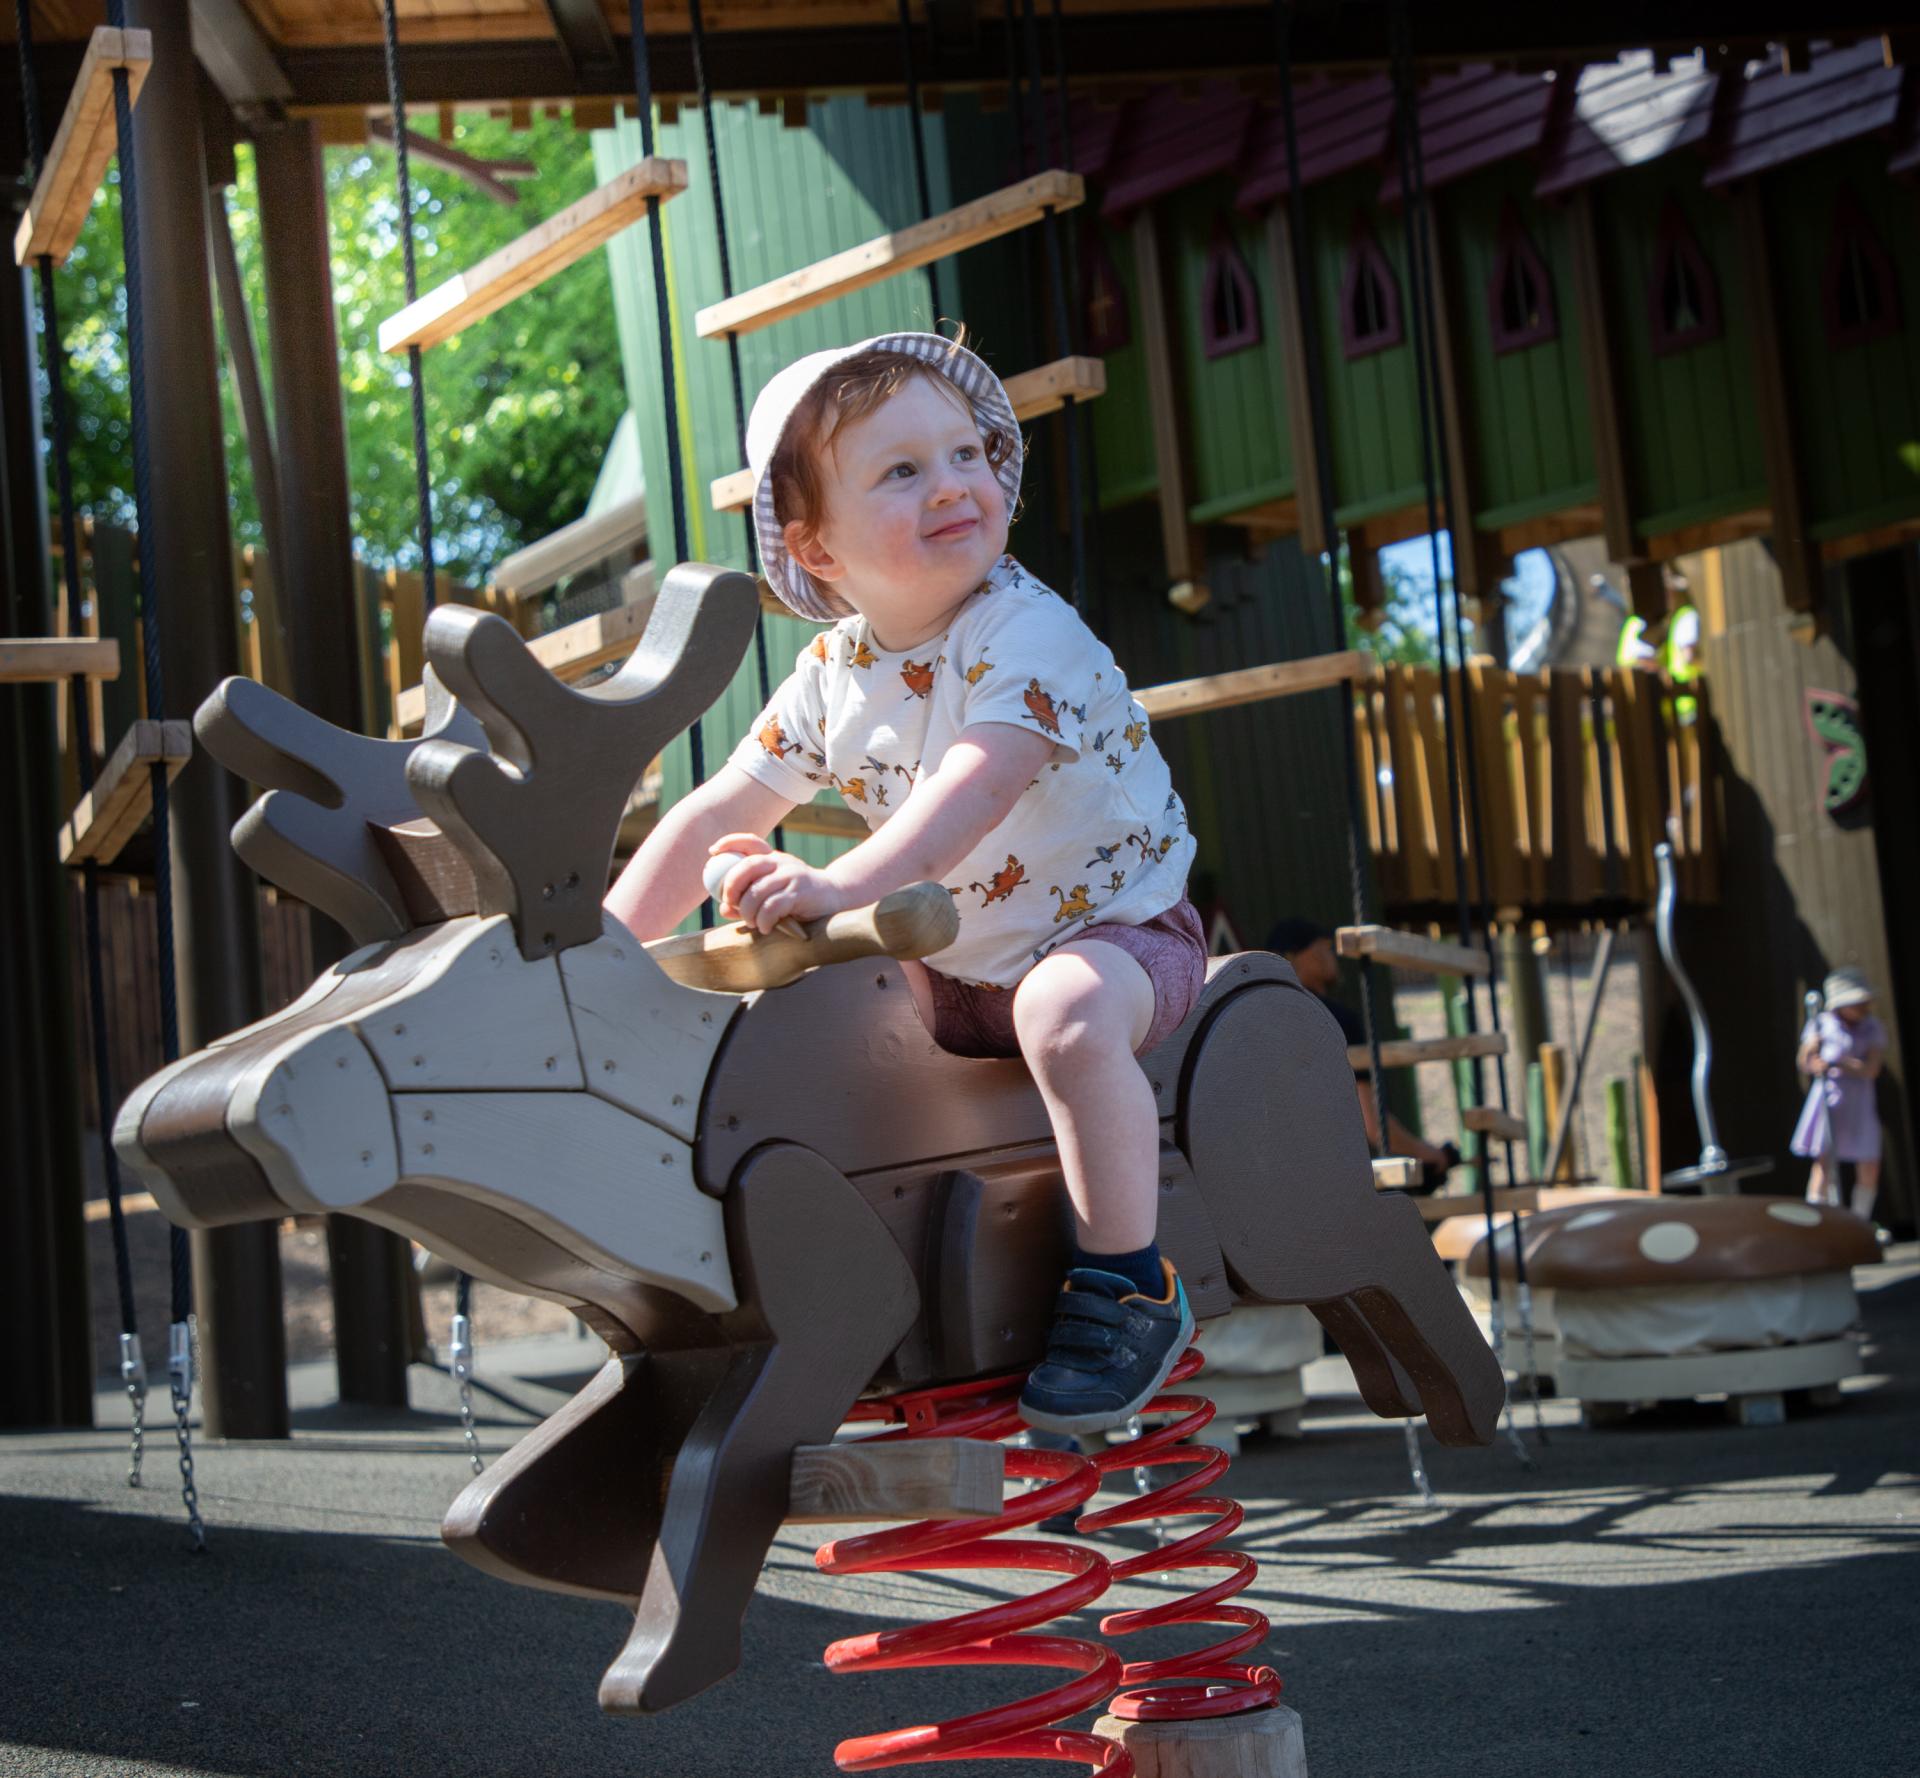 Young boy playing on rocking reindeer at Lilidorei playground